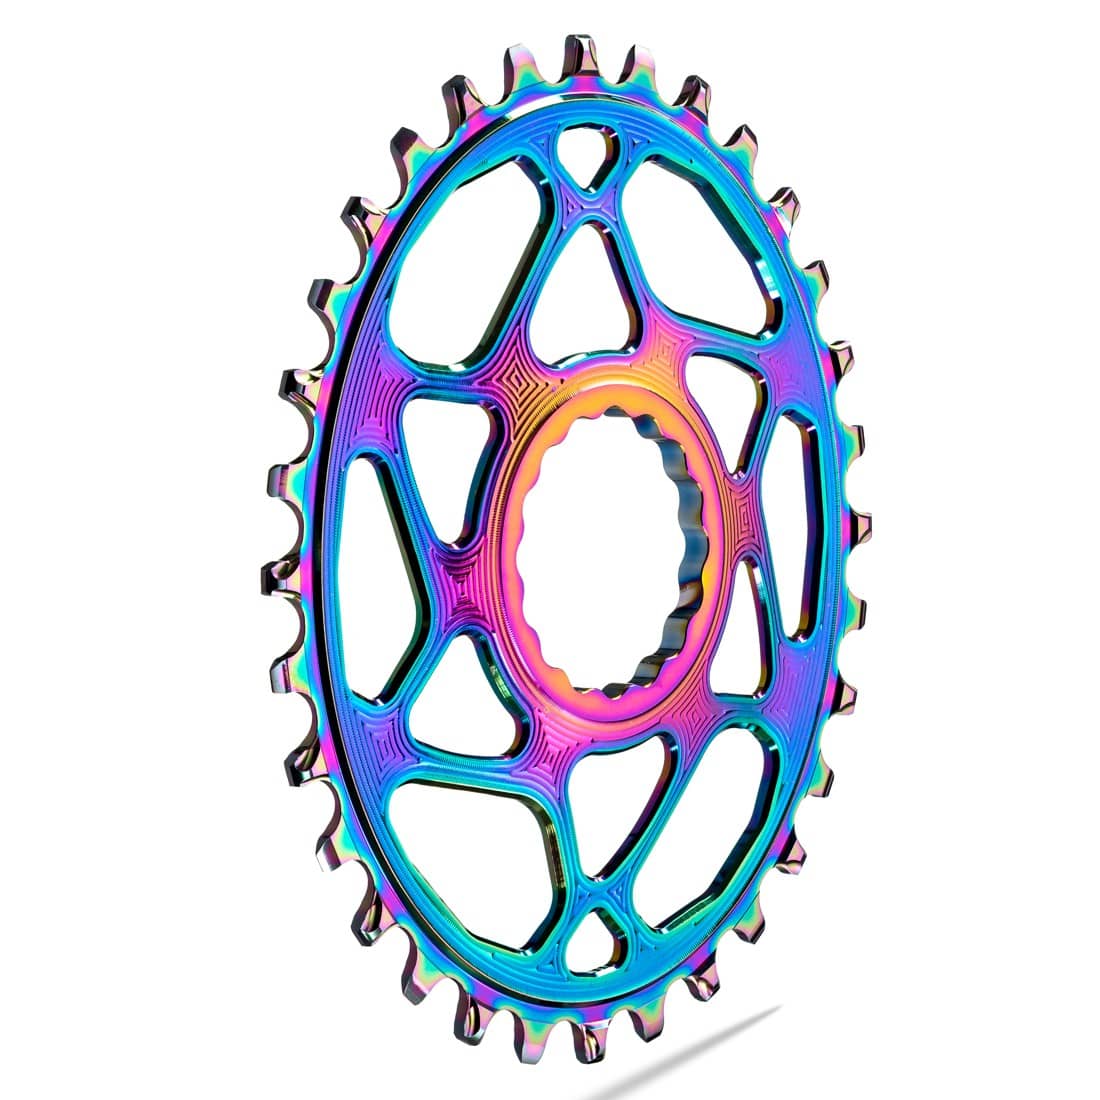 absoluteblack OVAL BOOST narrow wide direct mount cinch chainring for Race Face Rainbow